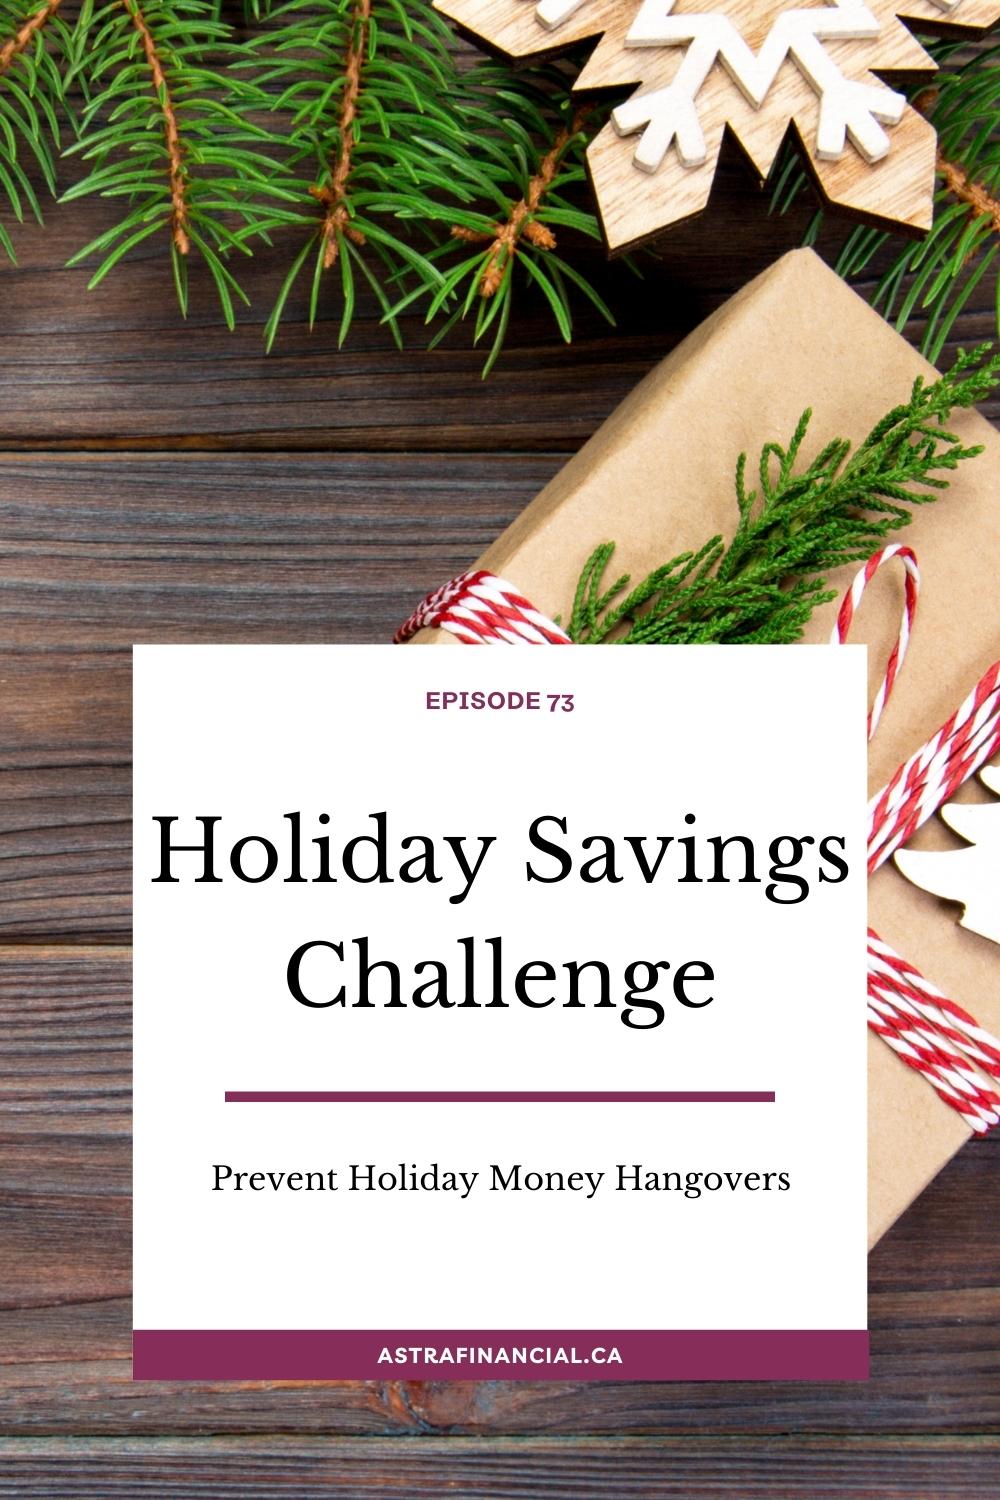 Episode 73 - Your Holiday Savings Challenge